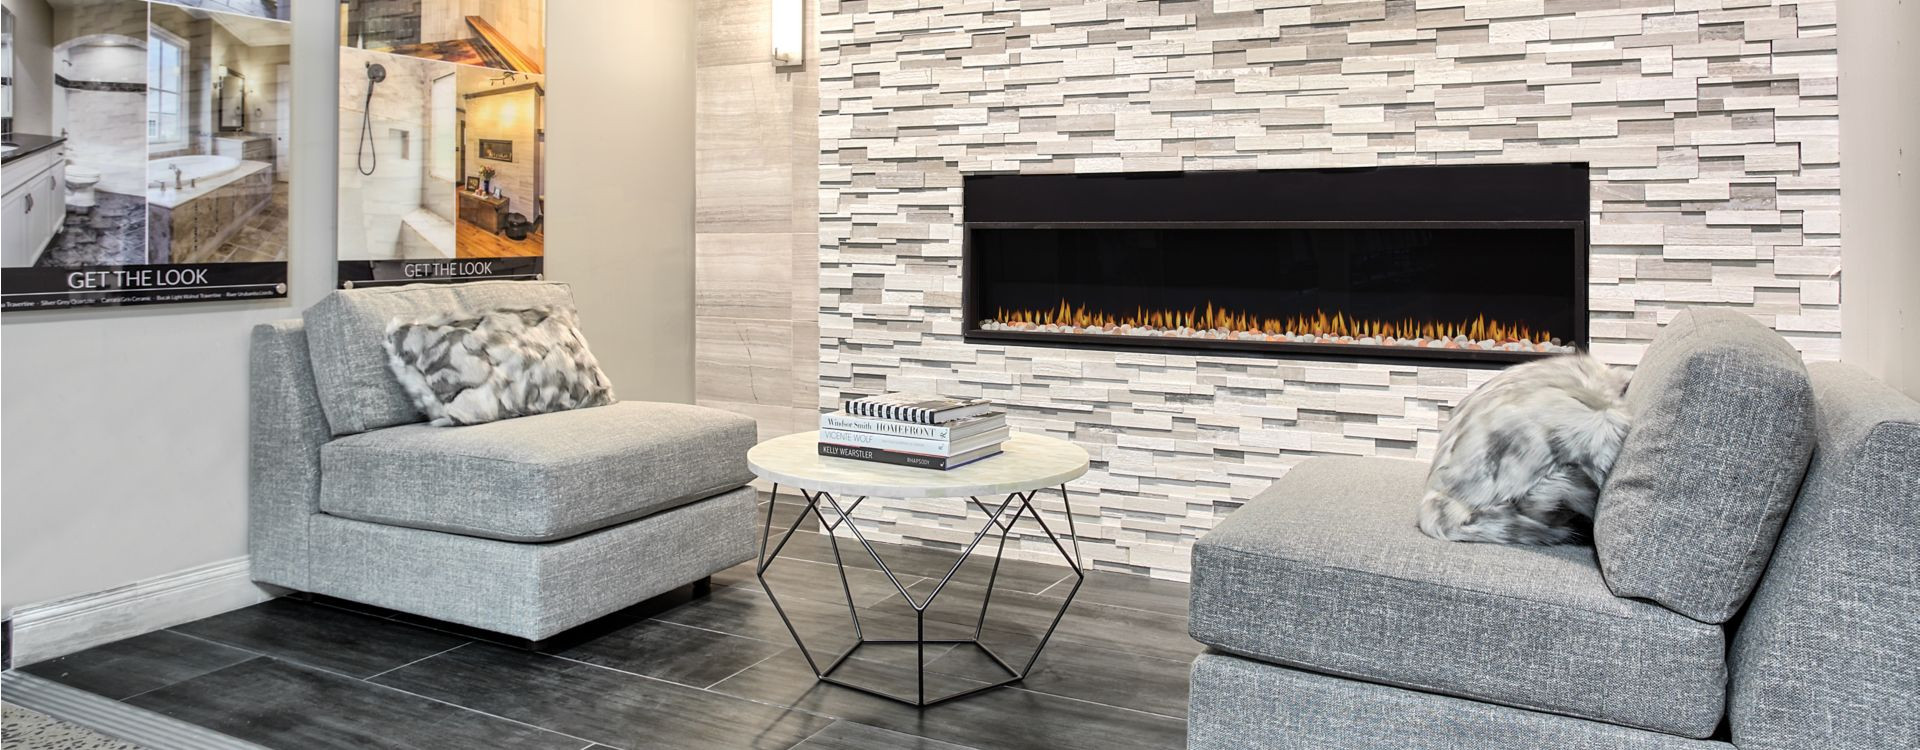 Tile Accent Wall Living Room
 Living Room Tile Designs Trends & Ideas for 2019 – The